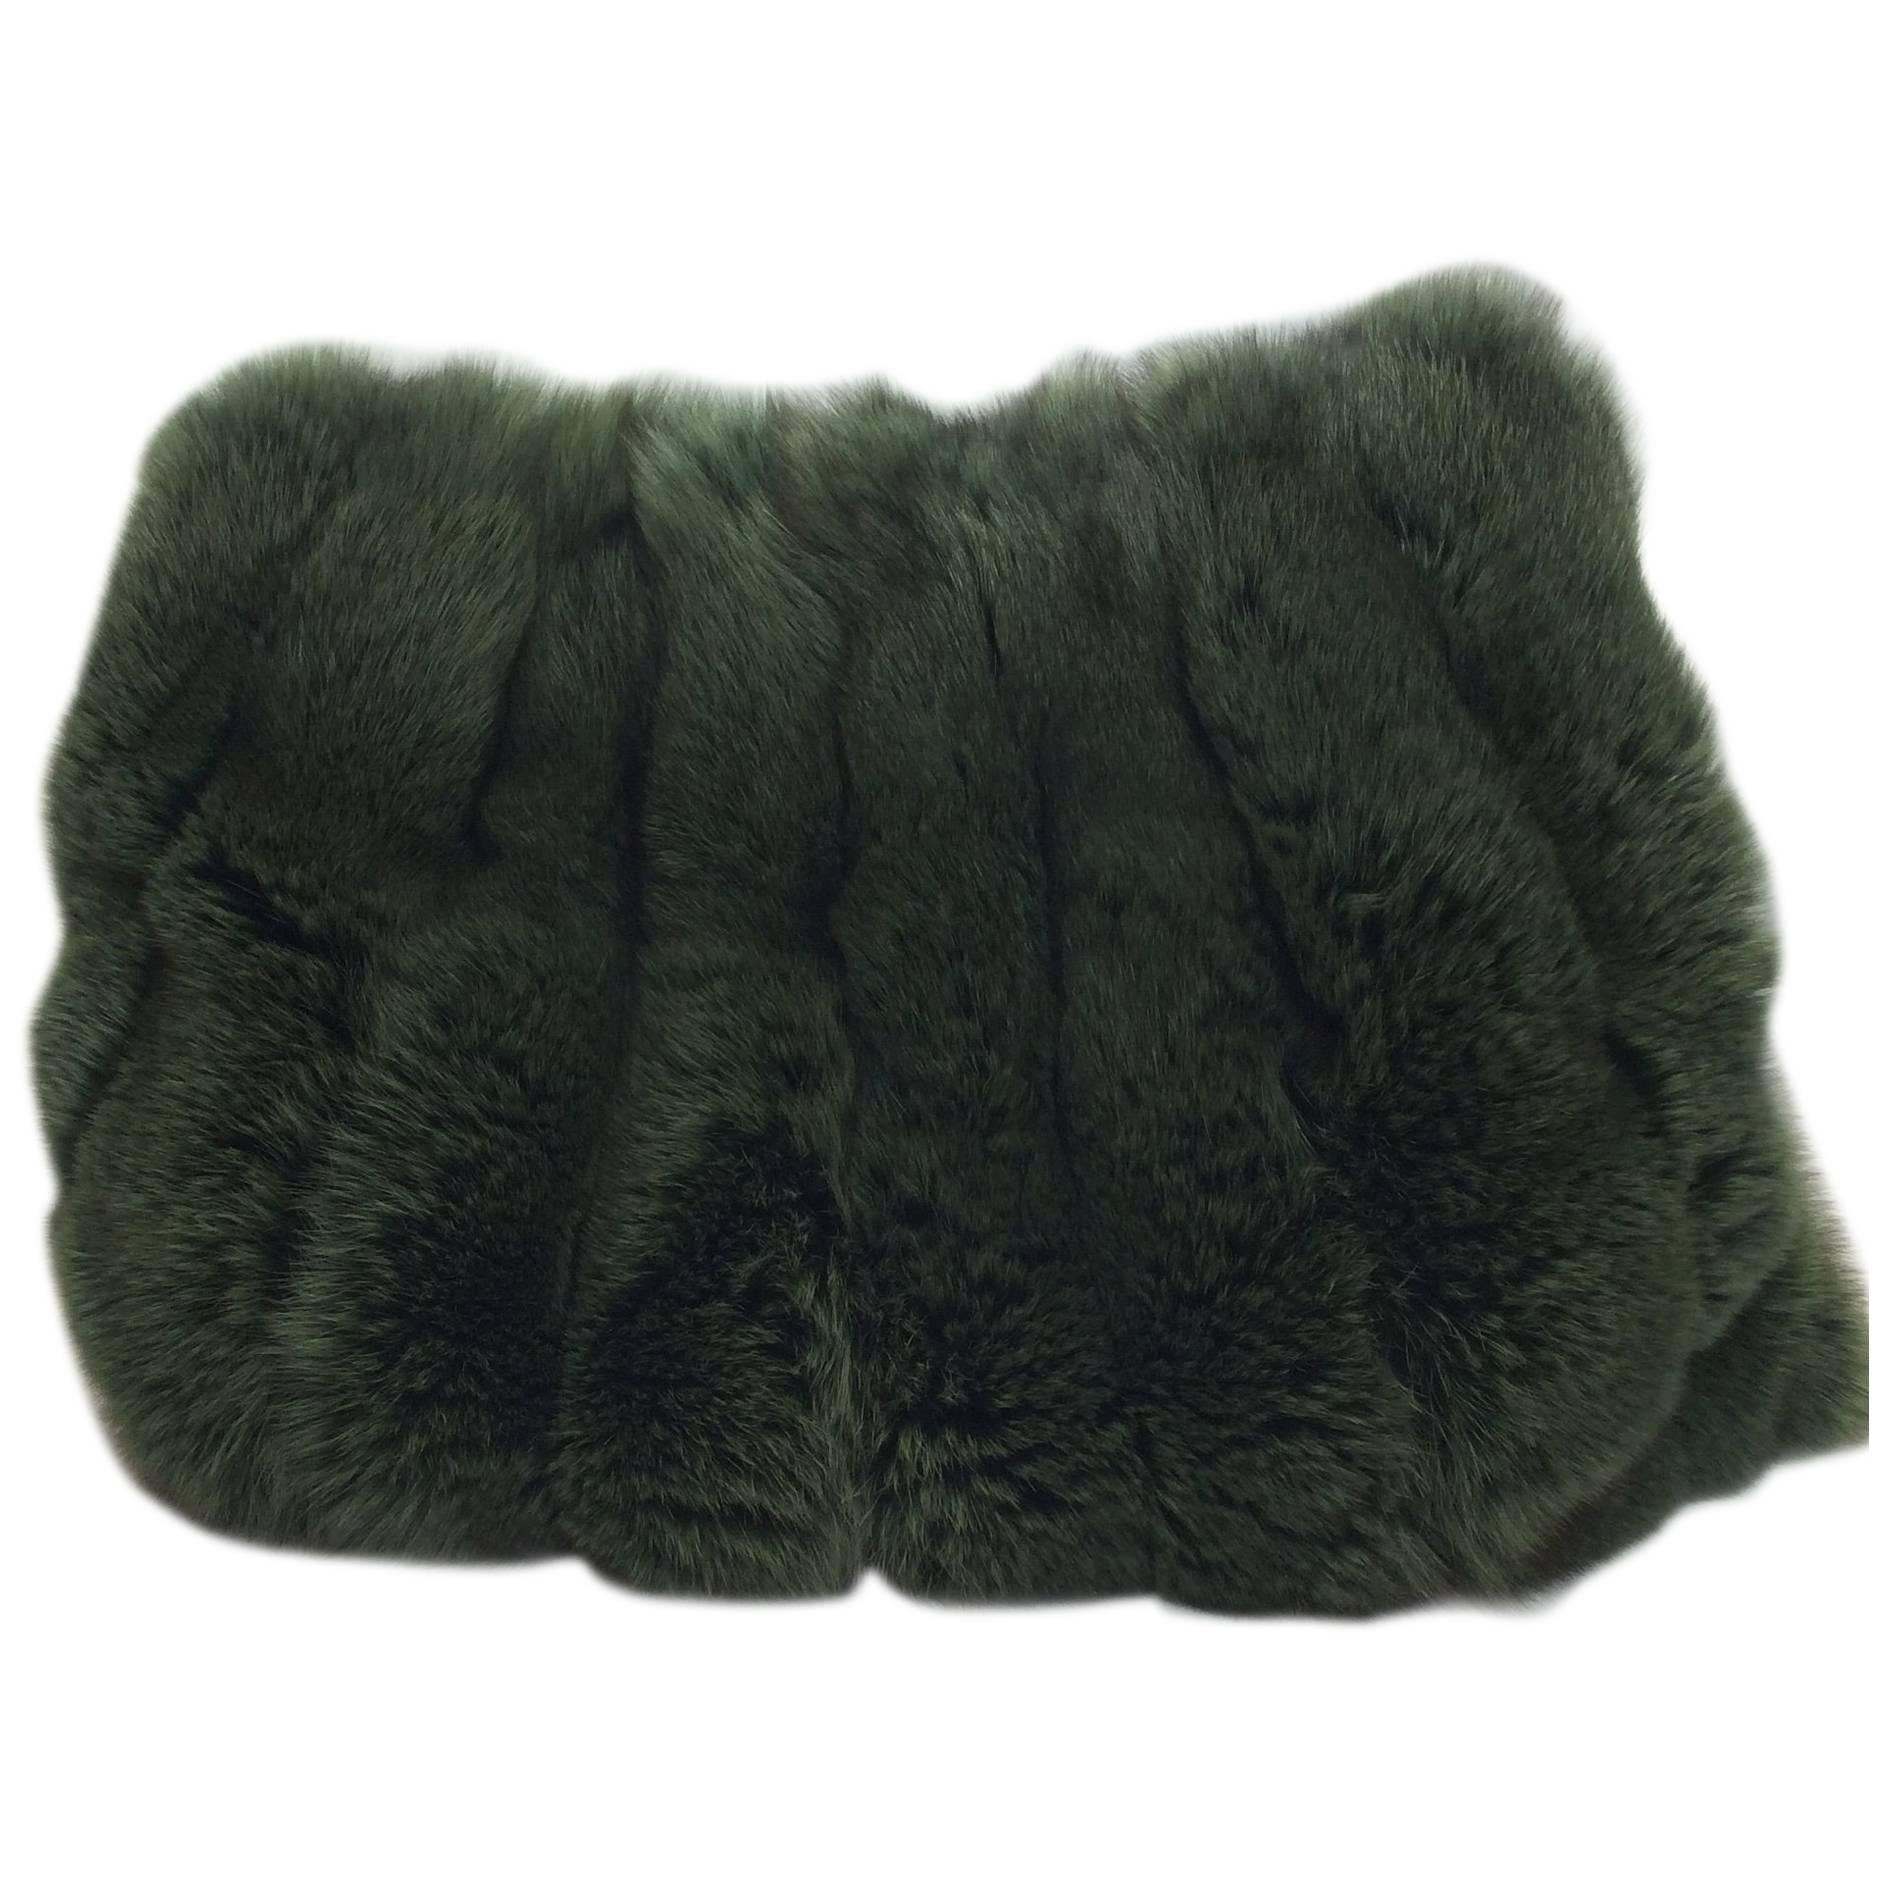 Green Dyed Rabbit Muff For Sale